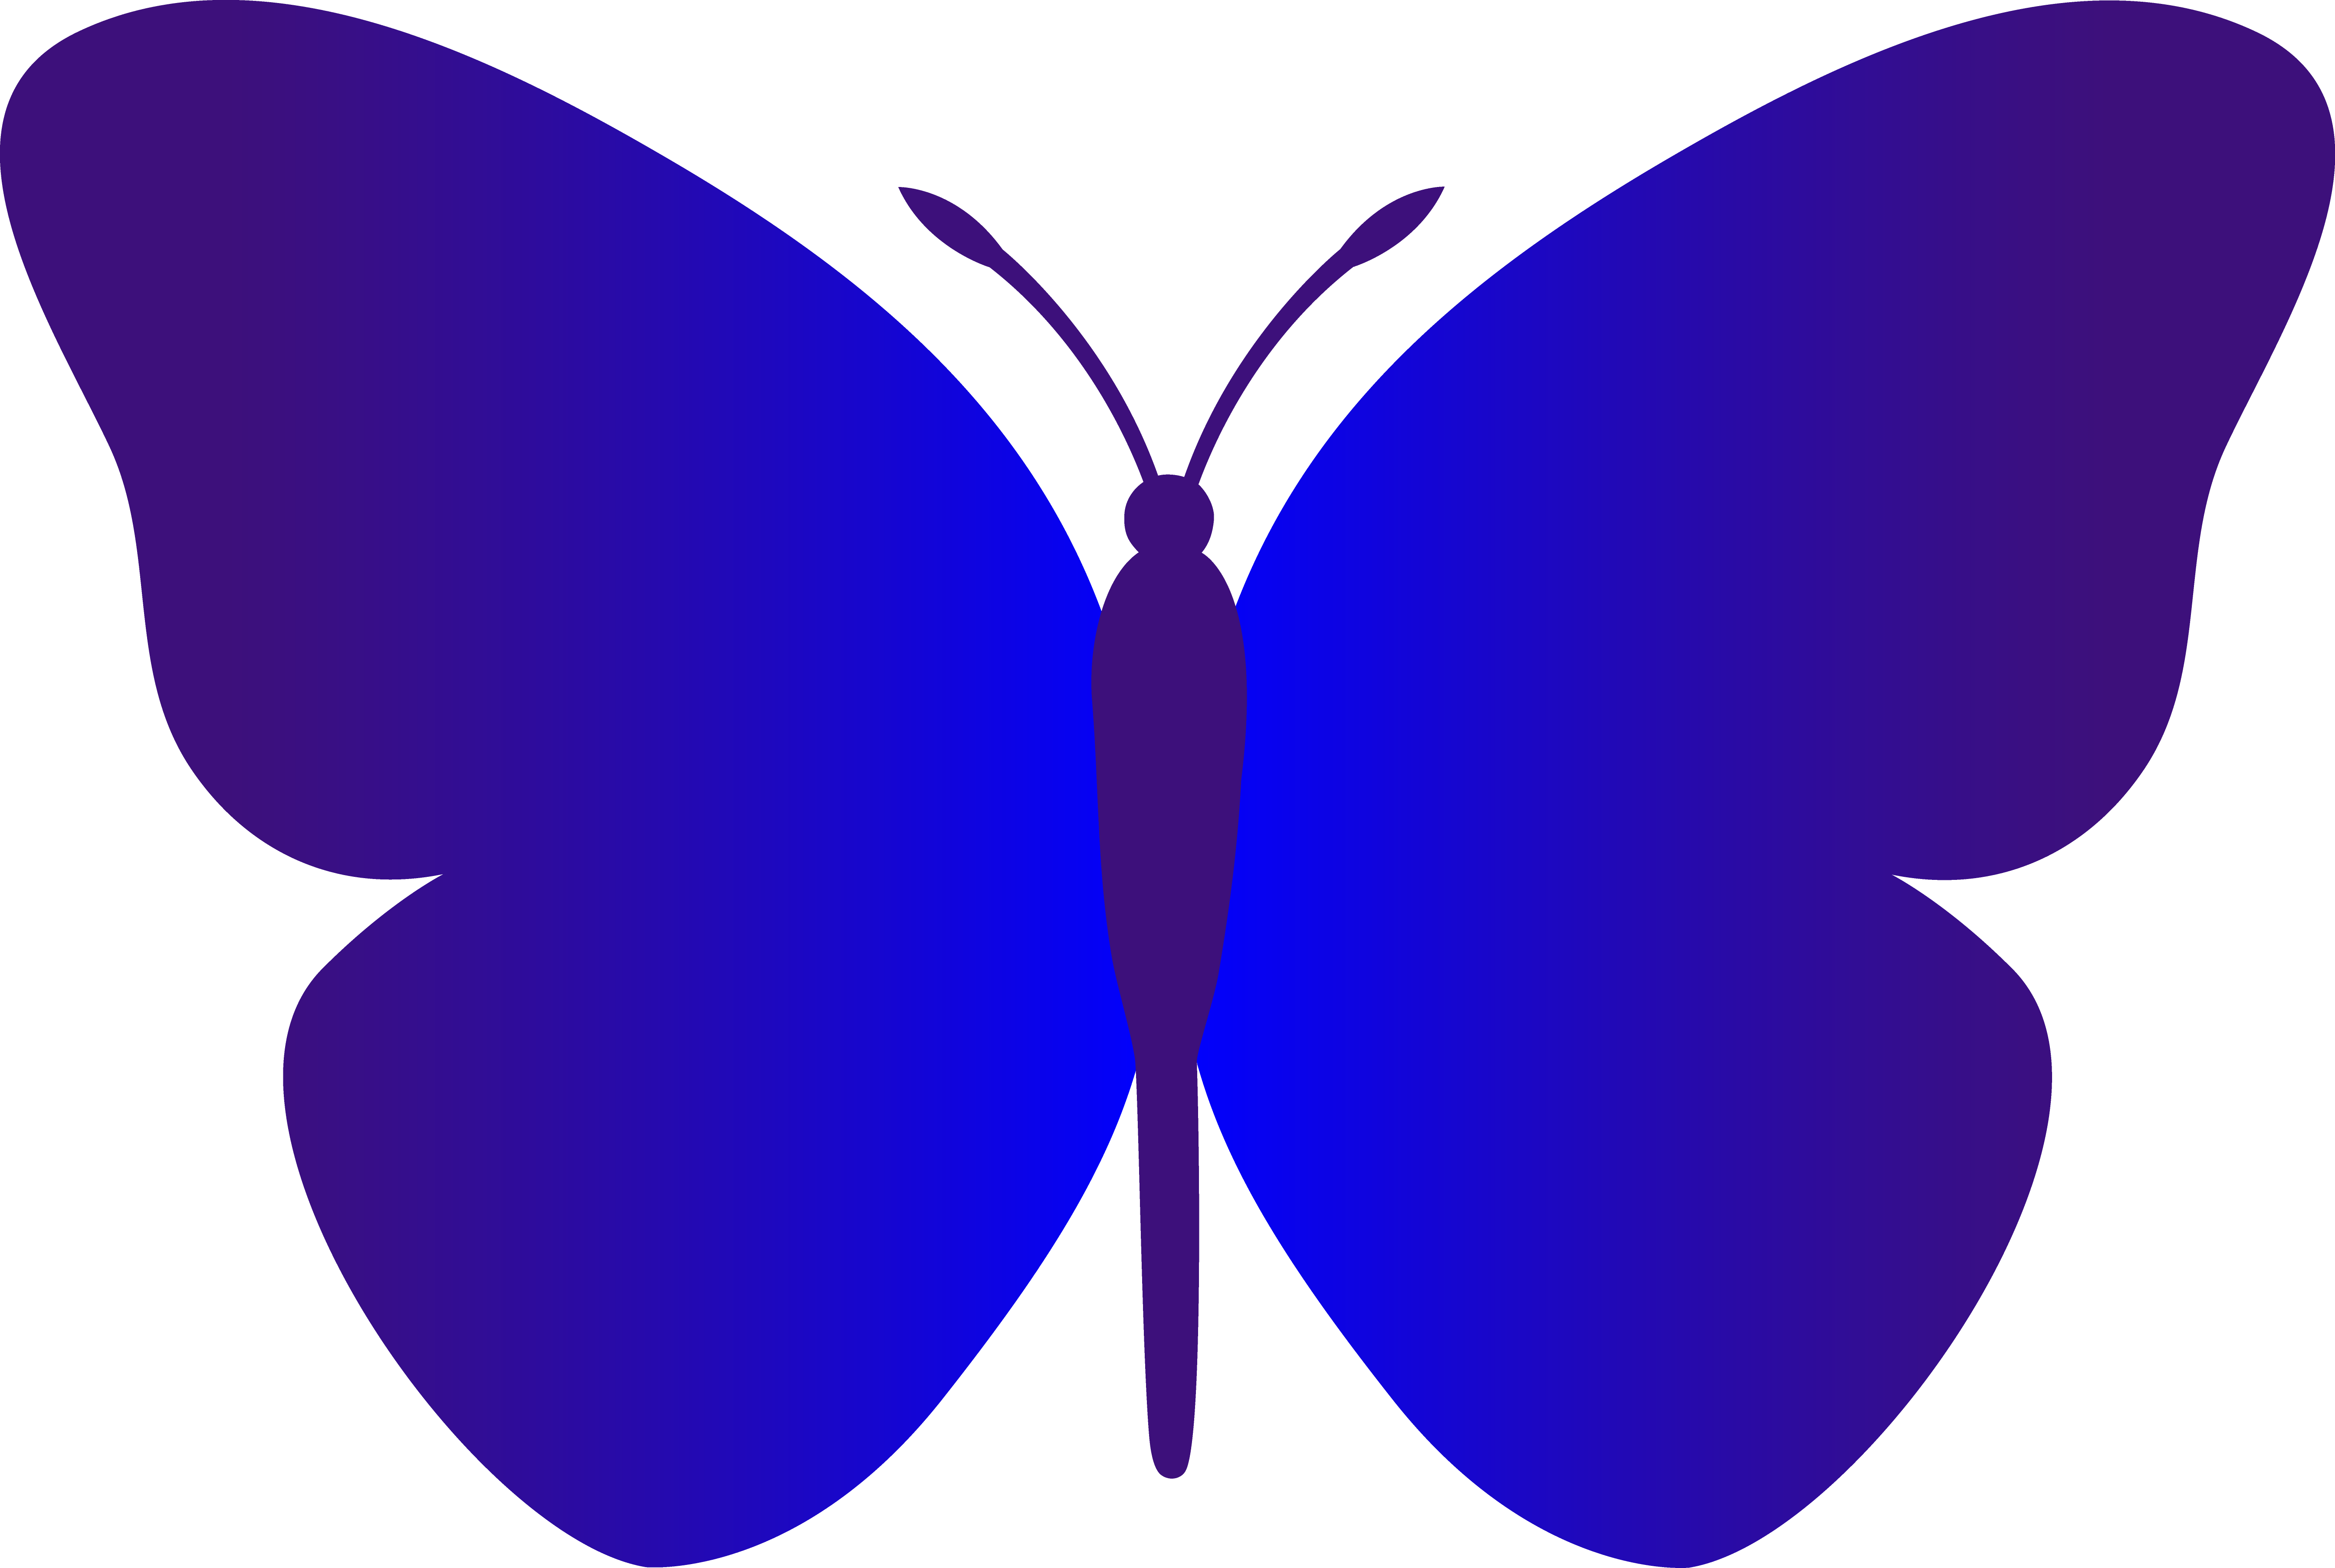 Hd butterfly clipart free download - ClipartFox